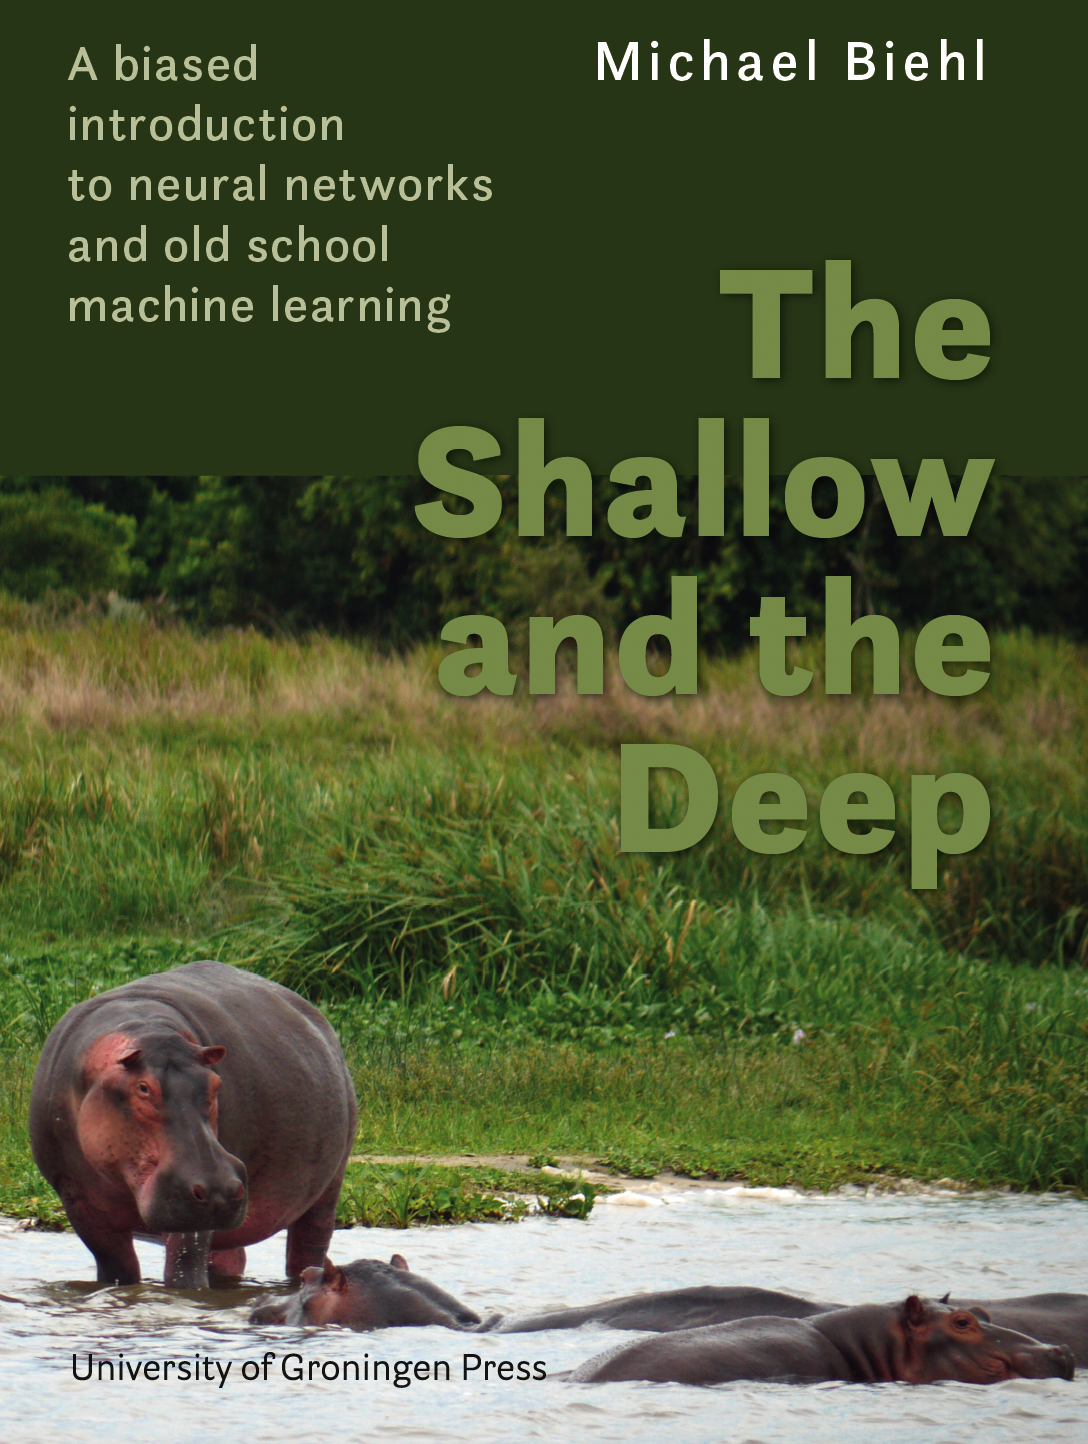 Michael Biehl, book cover, The Shallow and the Deep